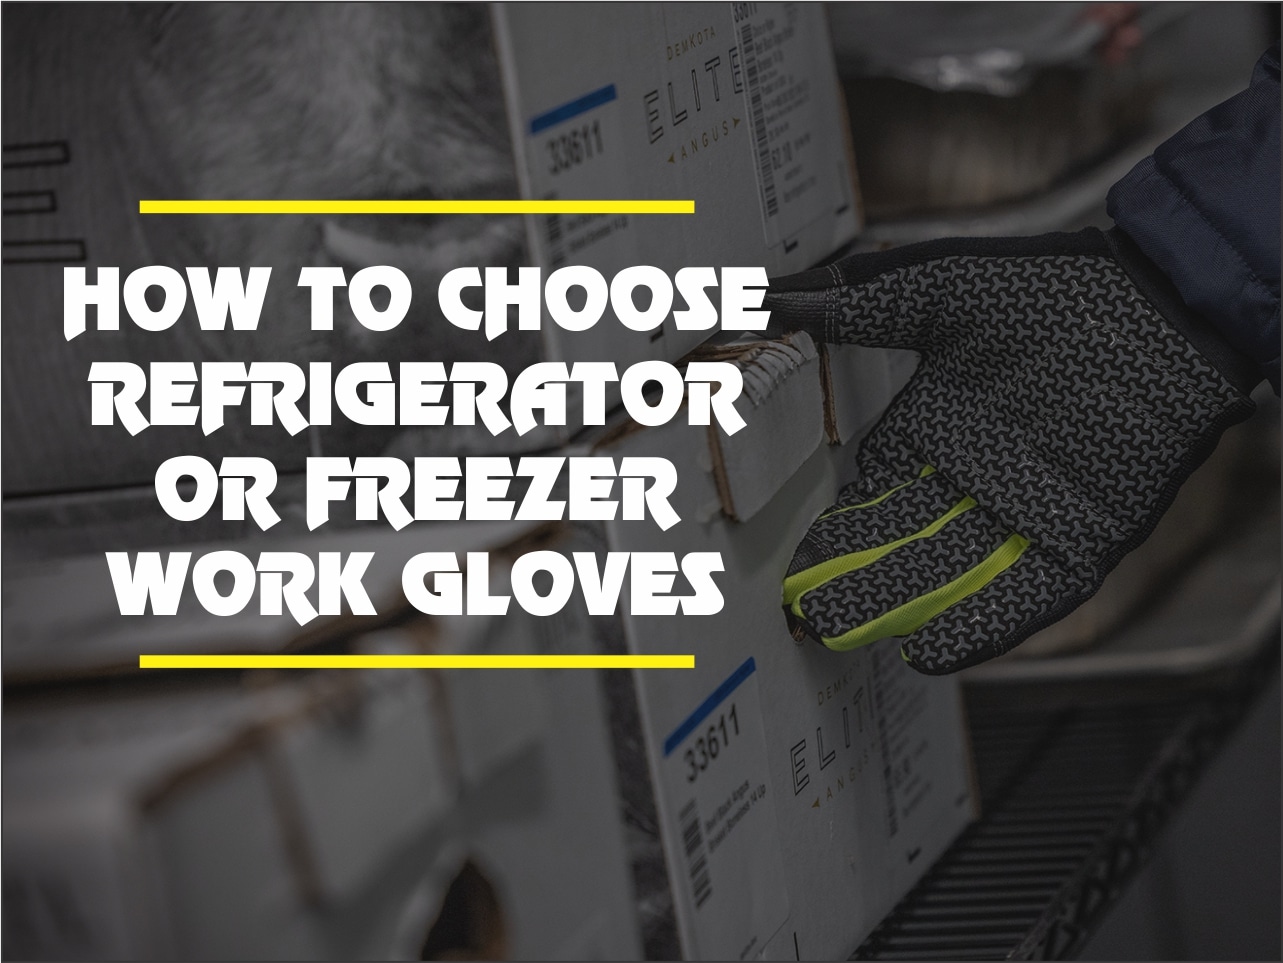 How to choose Refrigerator or Freezer work gloves